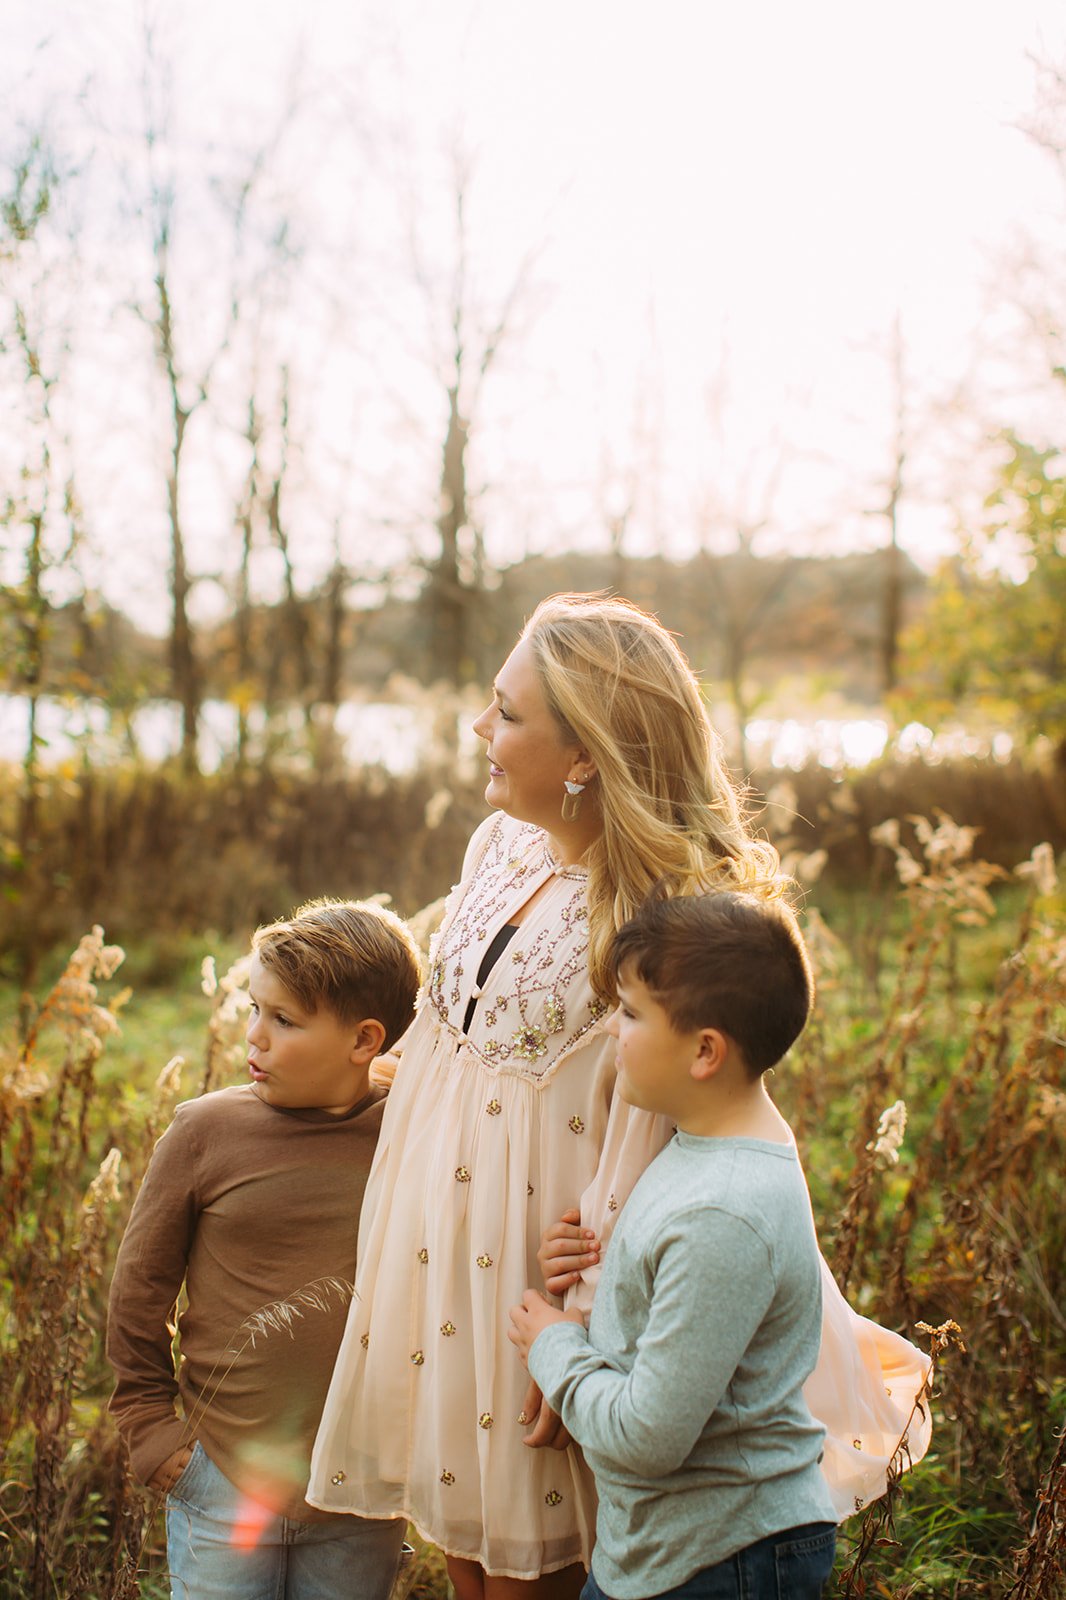  Teala Ward Photography captures a mother and her boys looking at something in the distance while hugging. heartwarming family photo #TealaWardPhotography #TealaWardFamilies #holidayfamilypics #photography #Illinoisfamilyphotography #familysession 